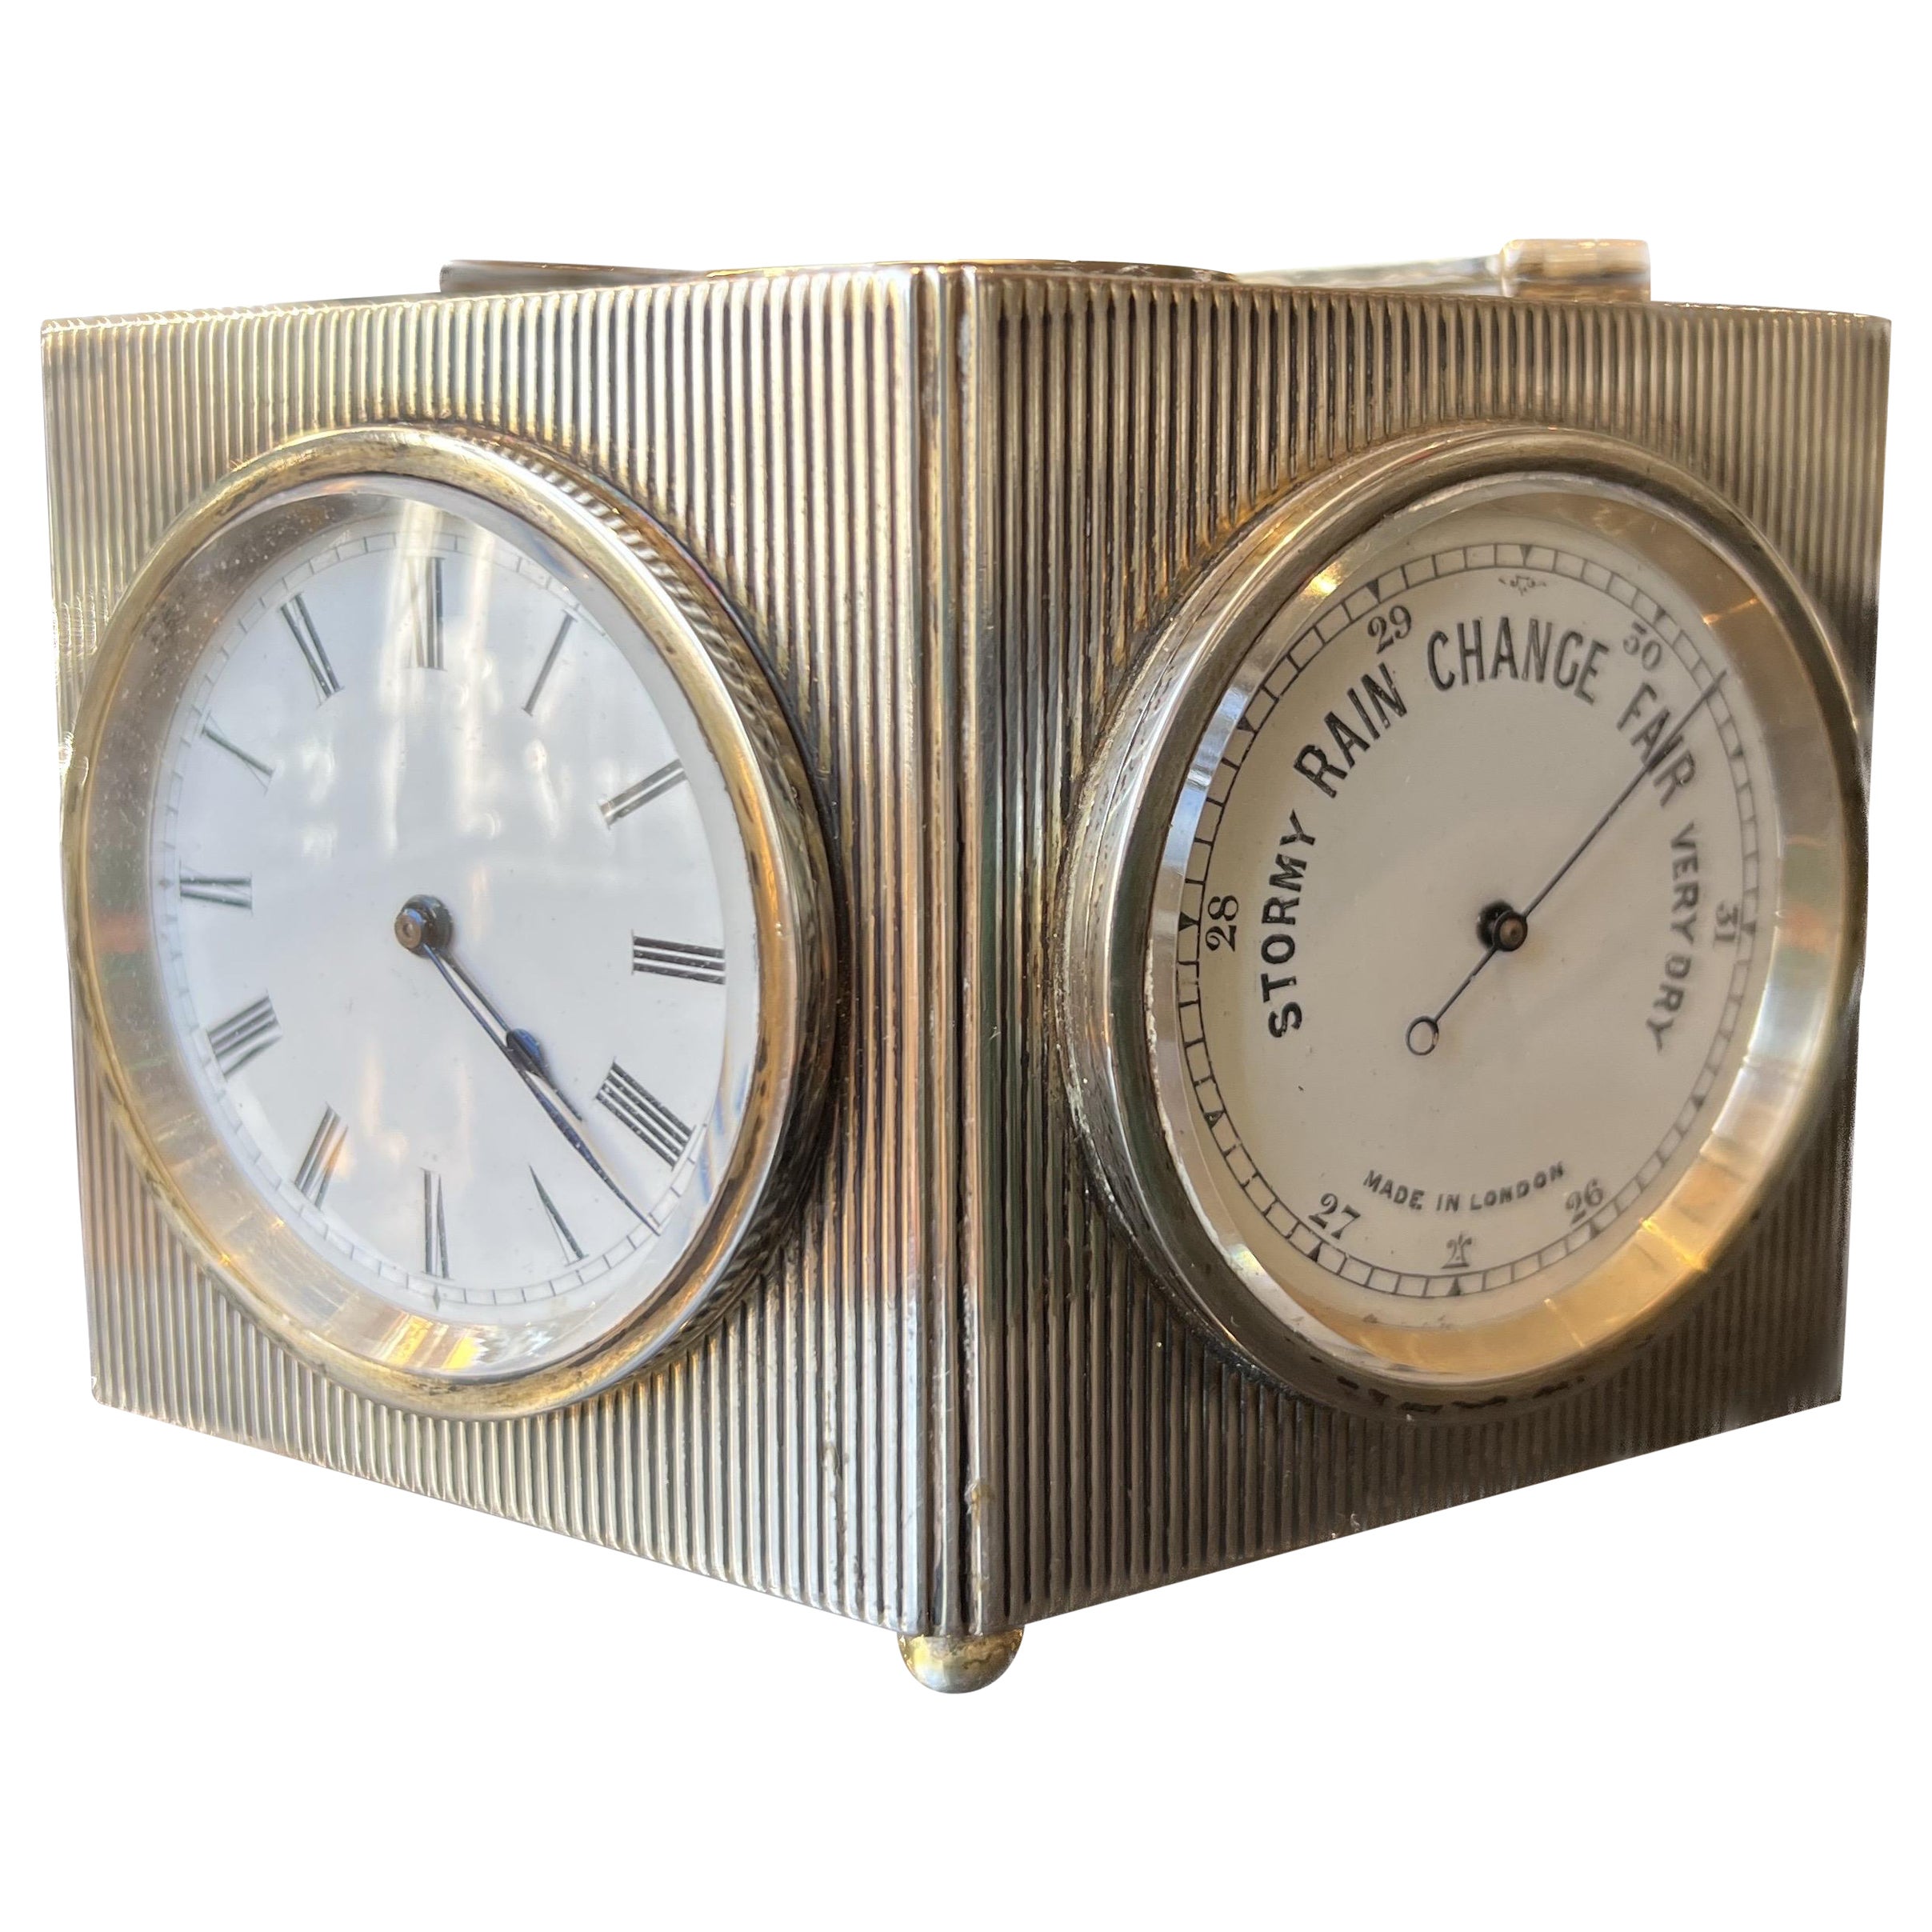 Sold at Auction: Tiffany & Co. Sterling Silver Desktop Thermometer